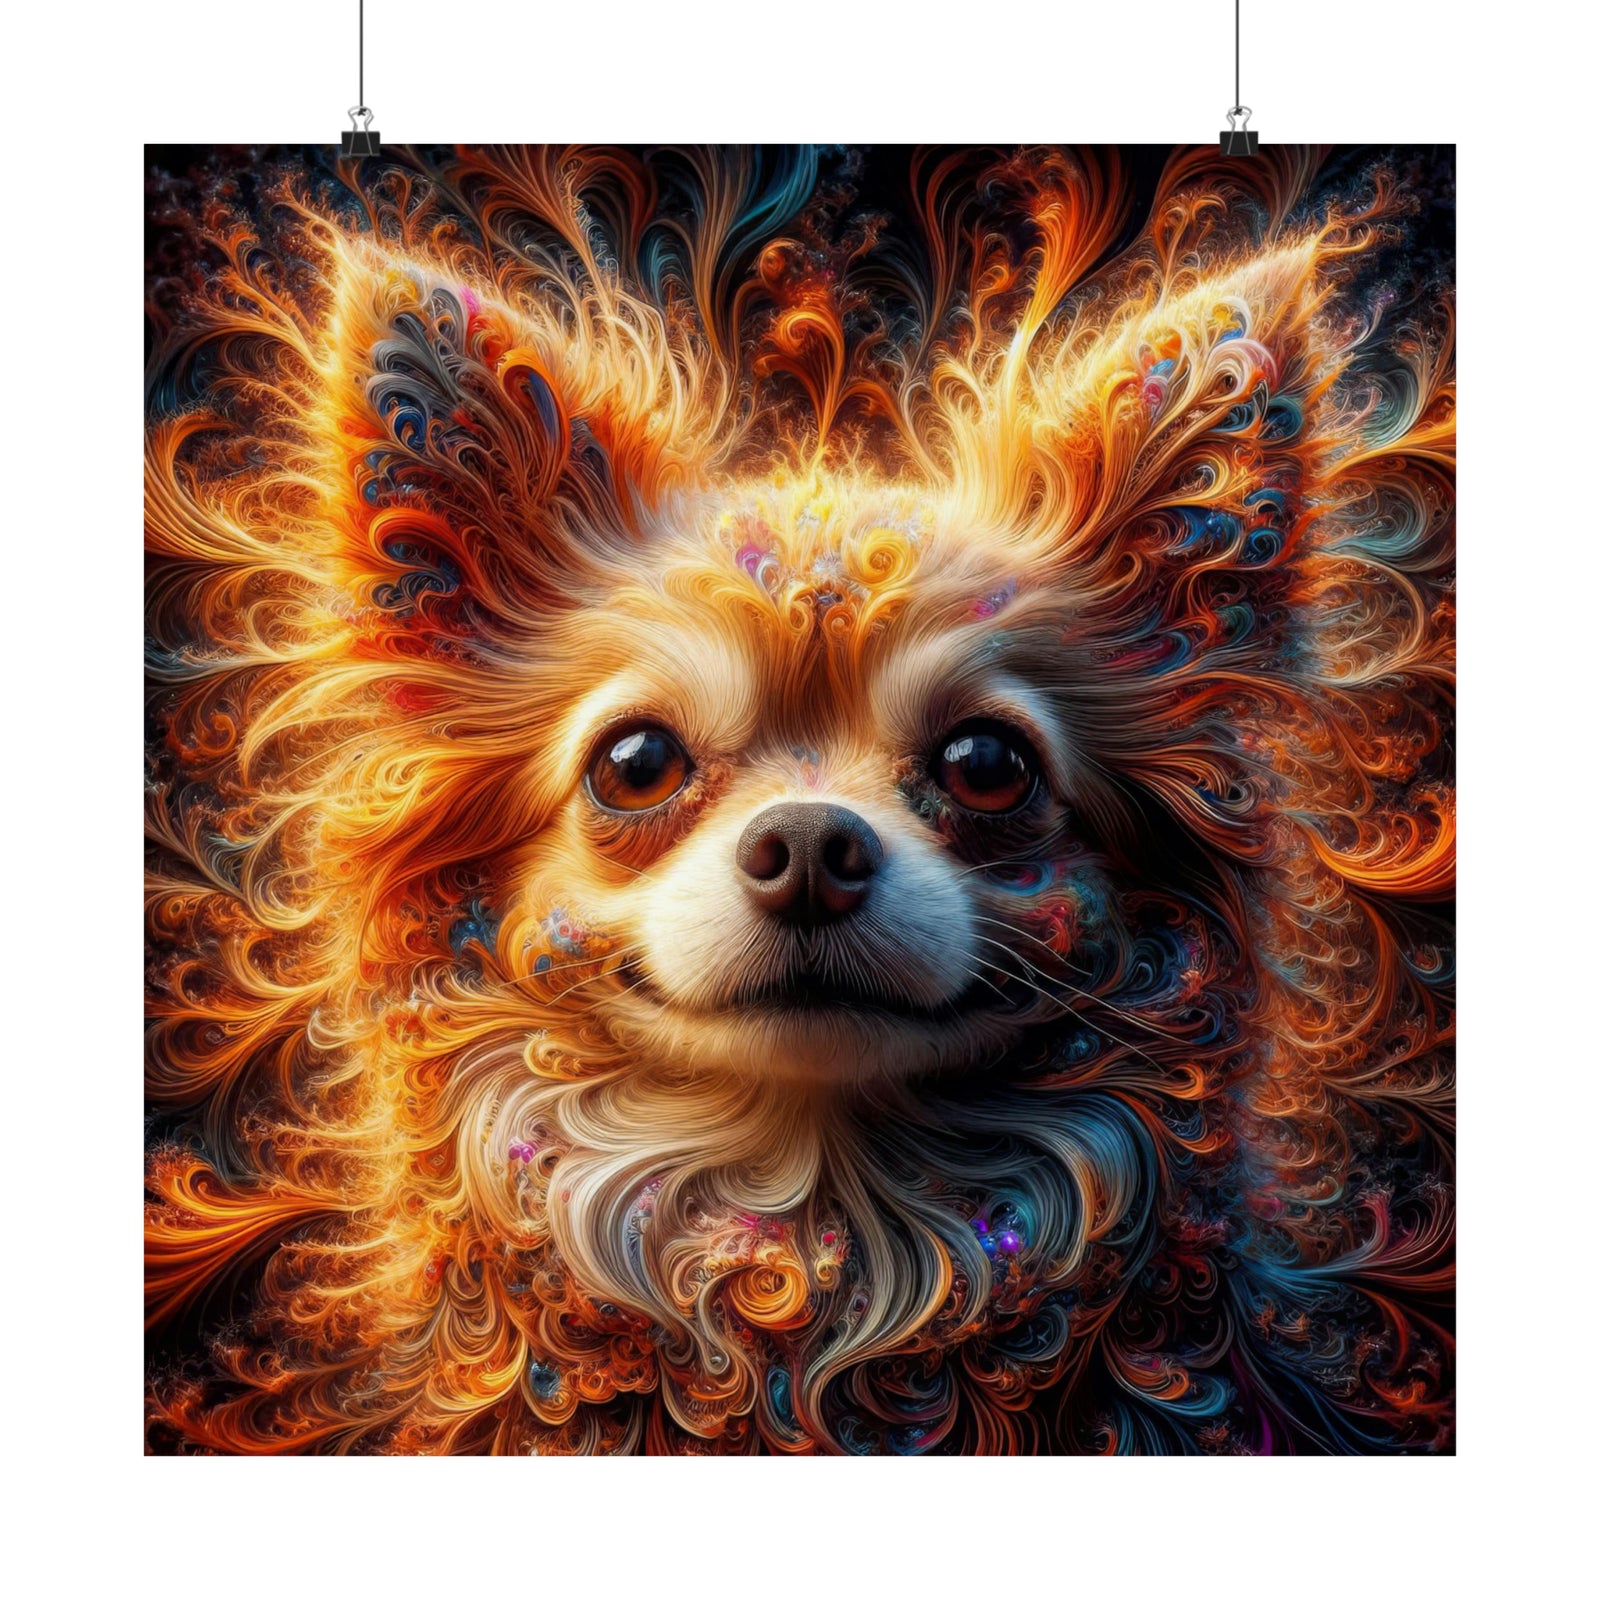 The Chihuahua's Enchantment Poster